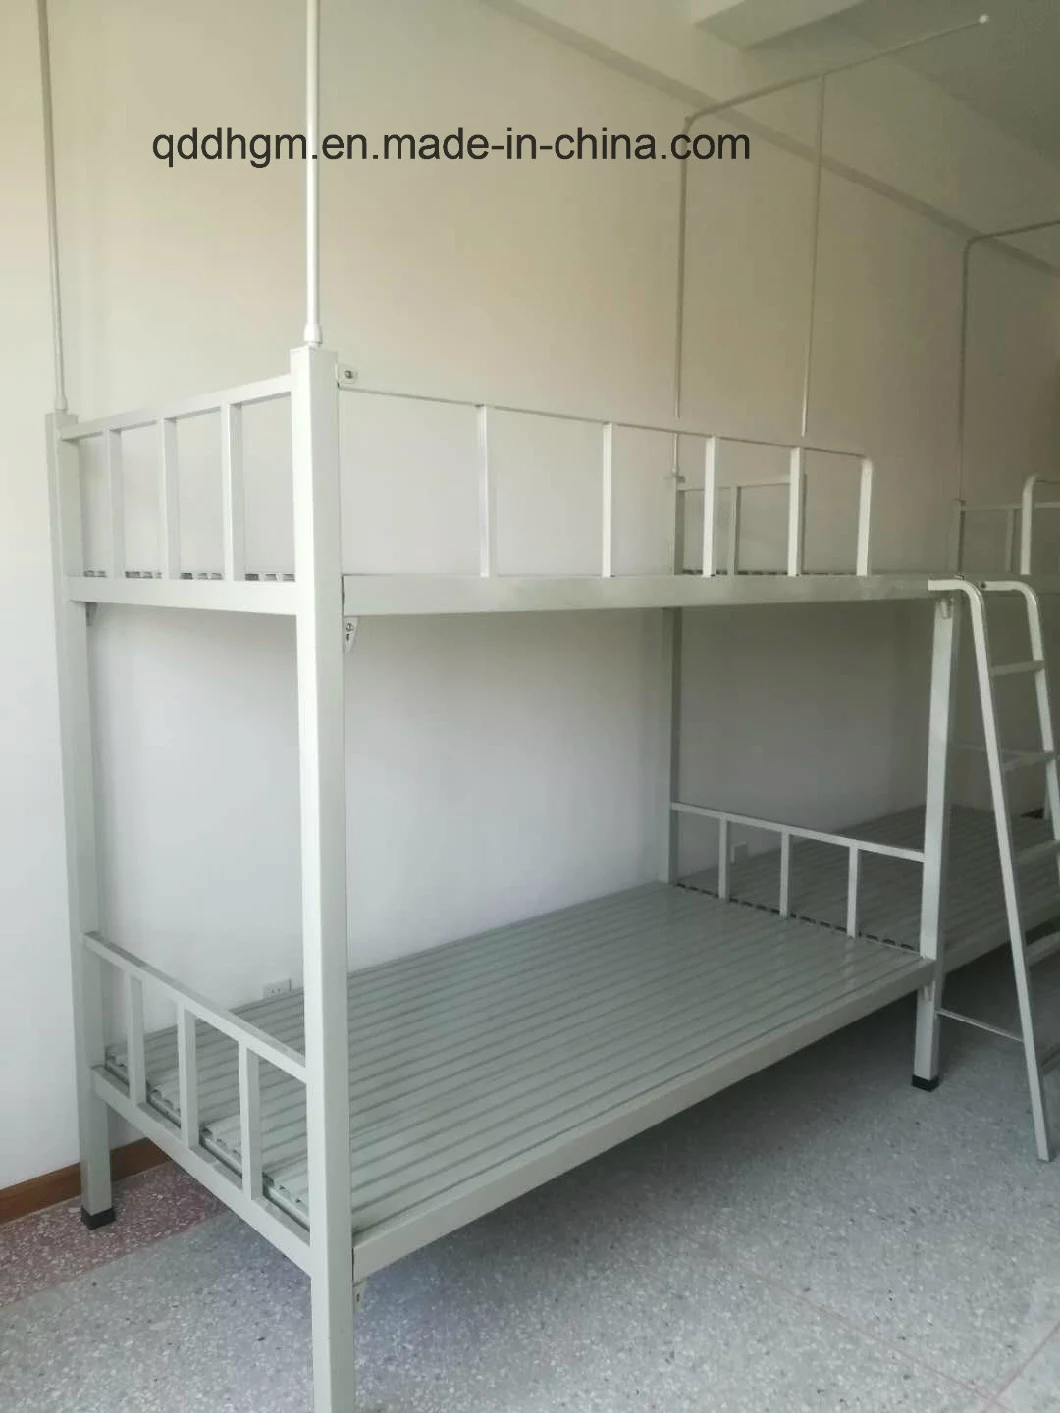 Factory Bunk Beds, Domitory Bunk Beds, Metal Beds for Students